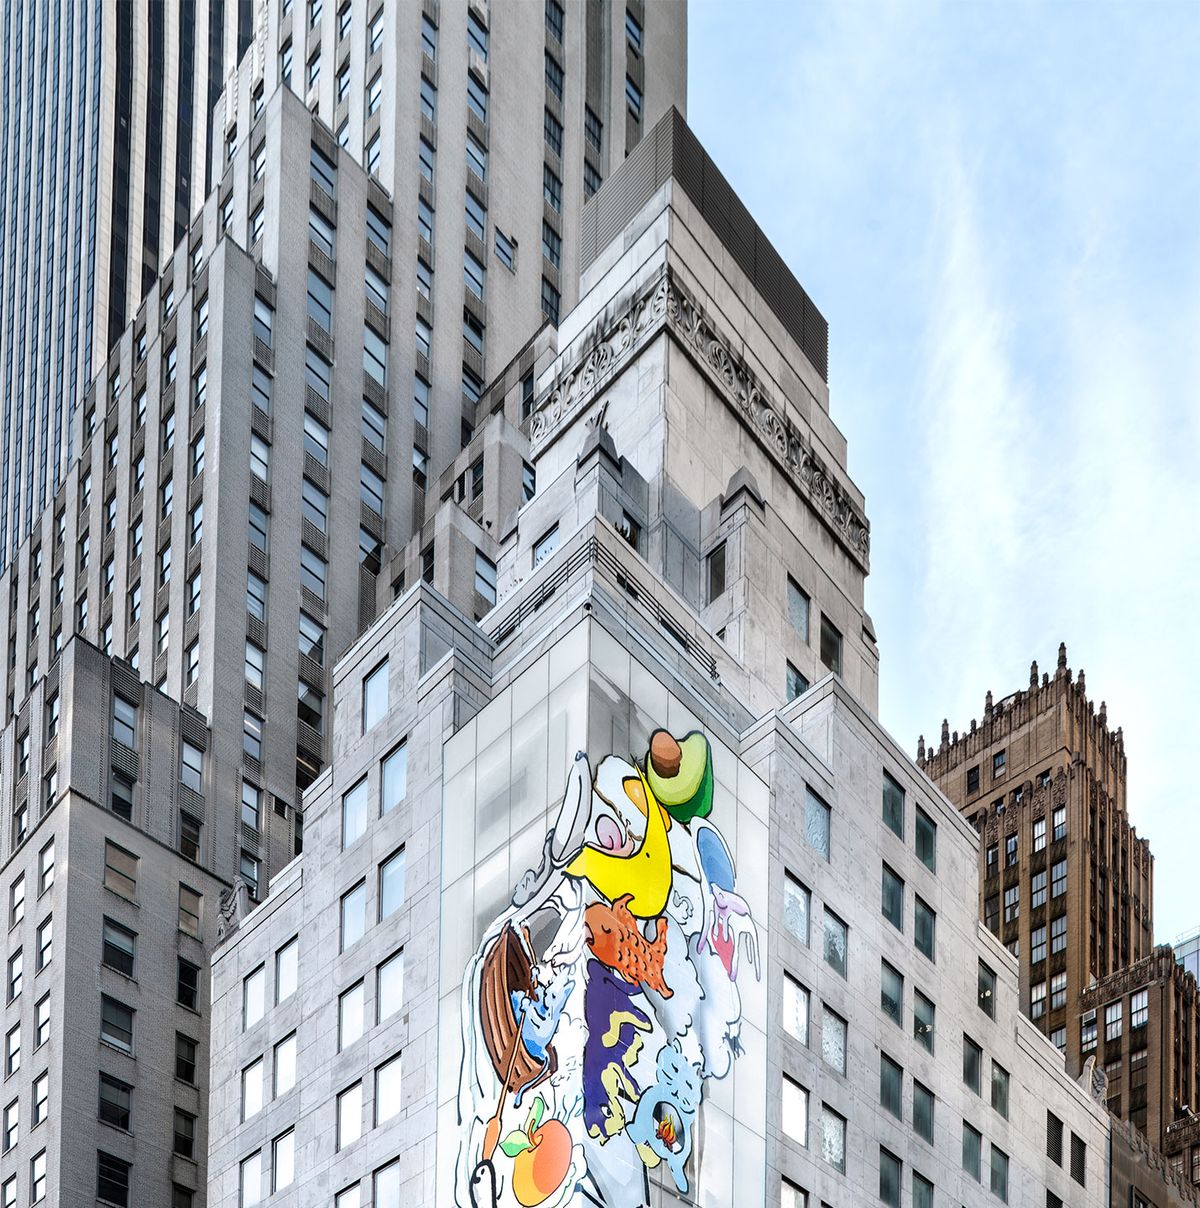 NYC ♥ NYC: Louis Vuitton Flagship Store on Fifth Avenue